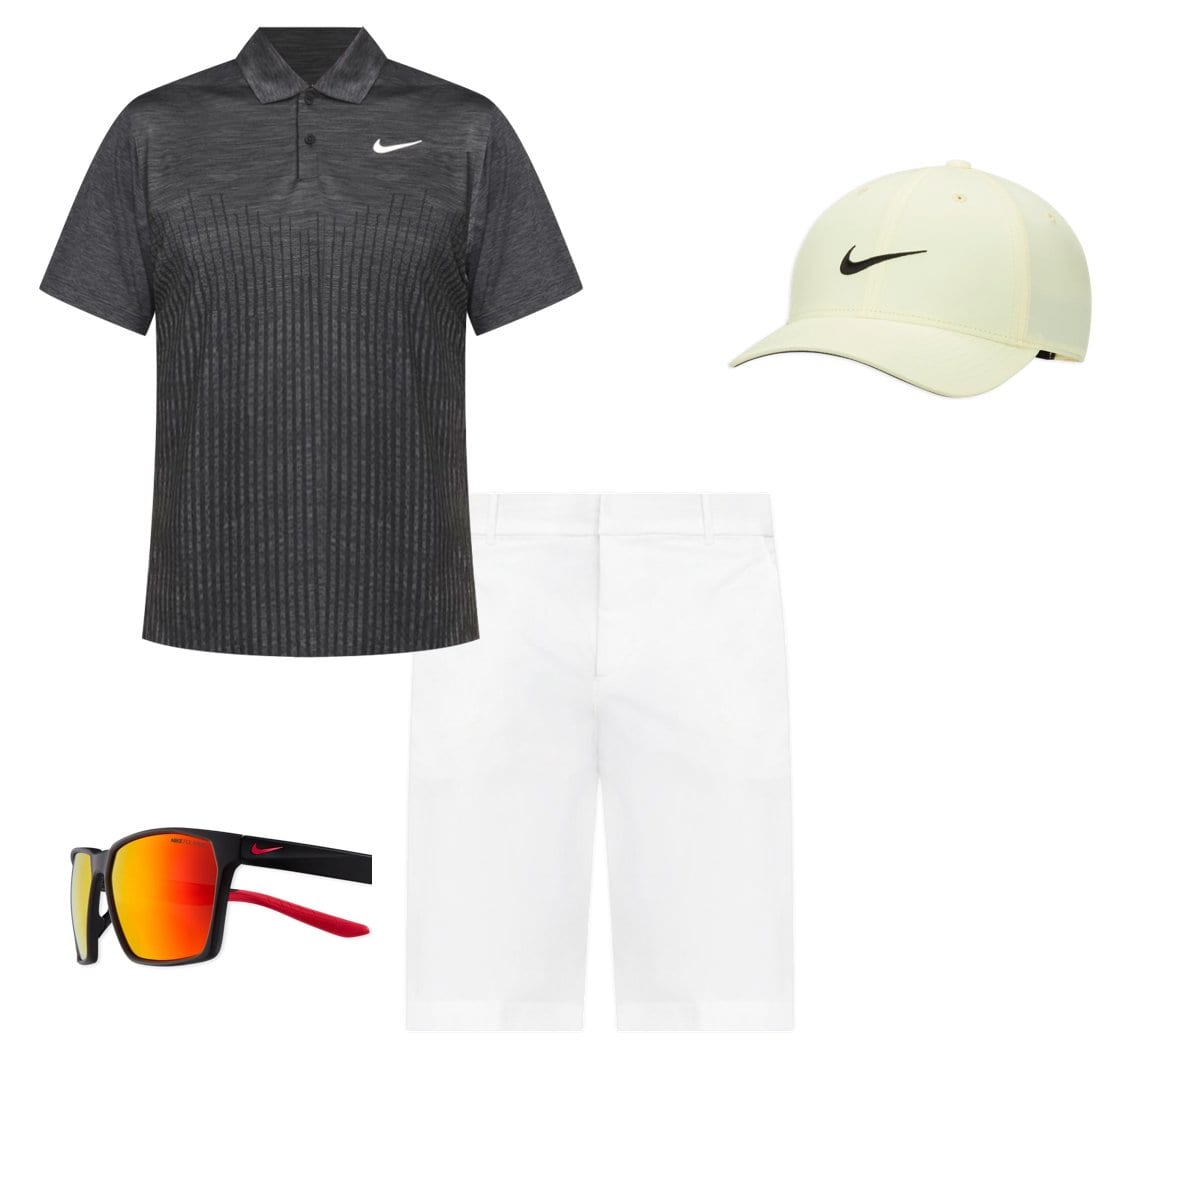 7 Golf Outfits for Men.